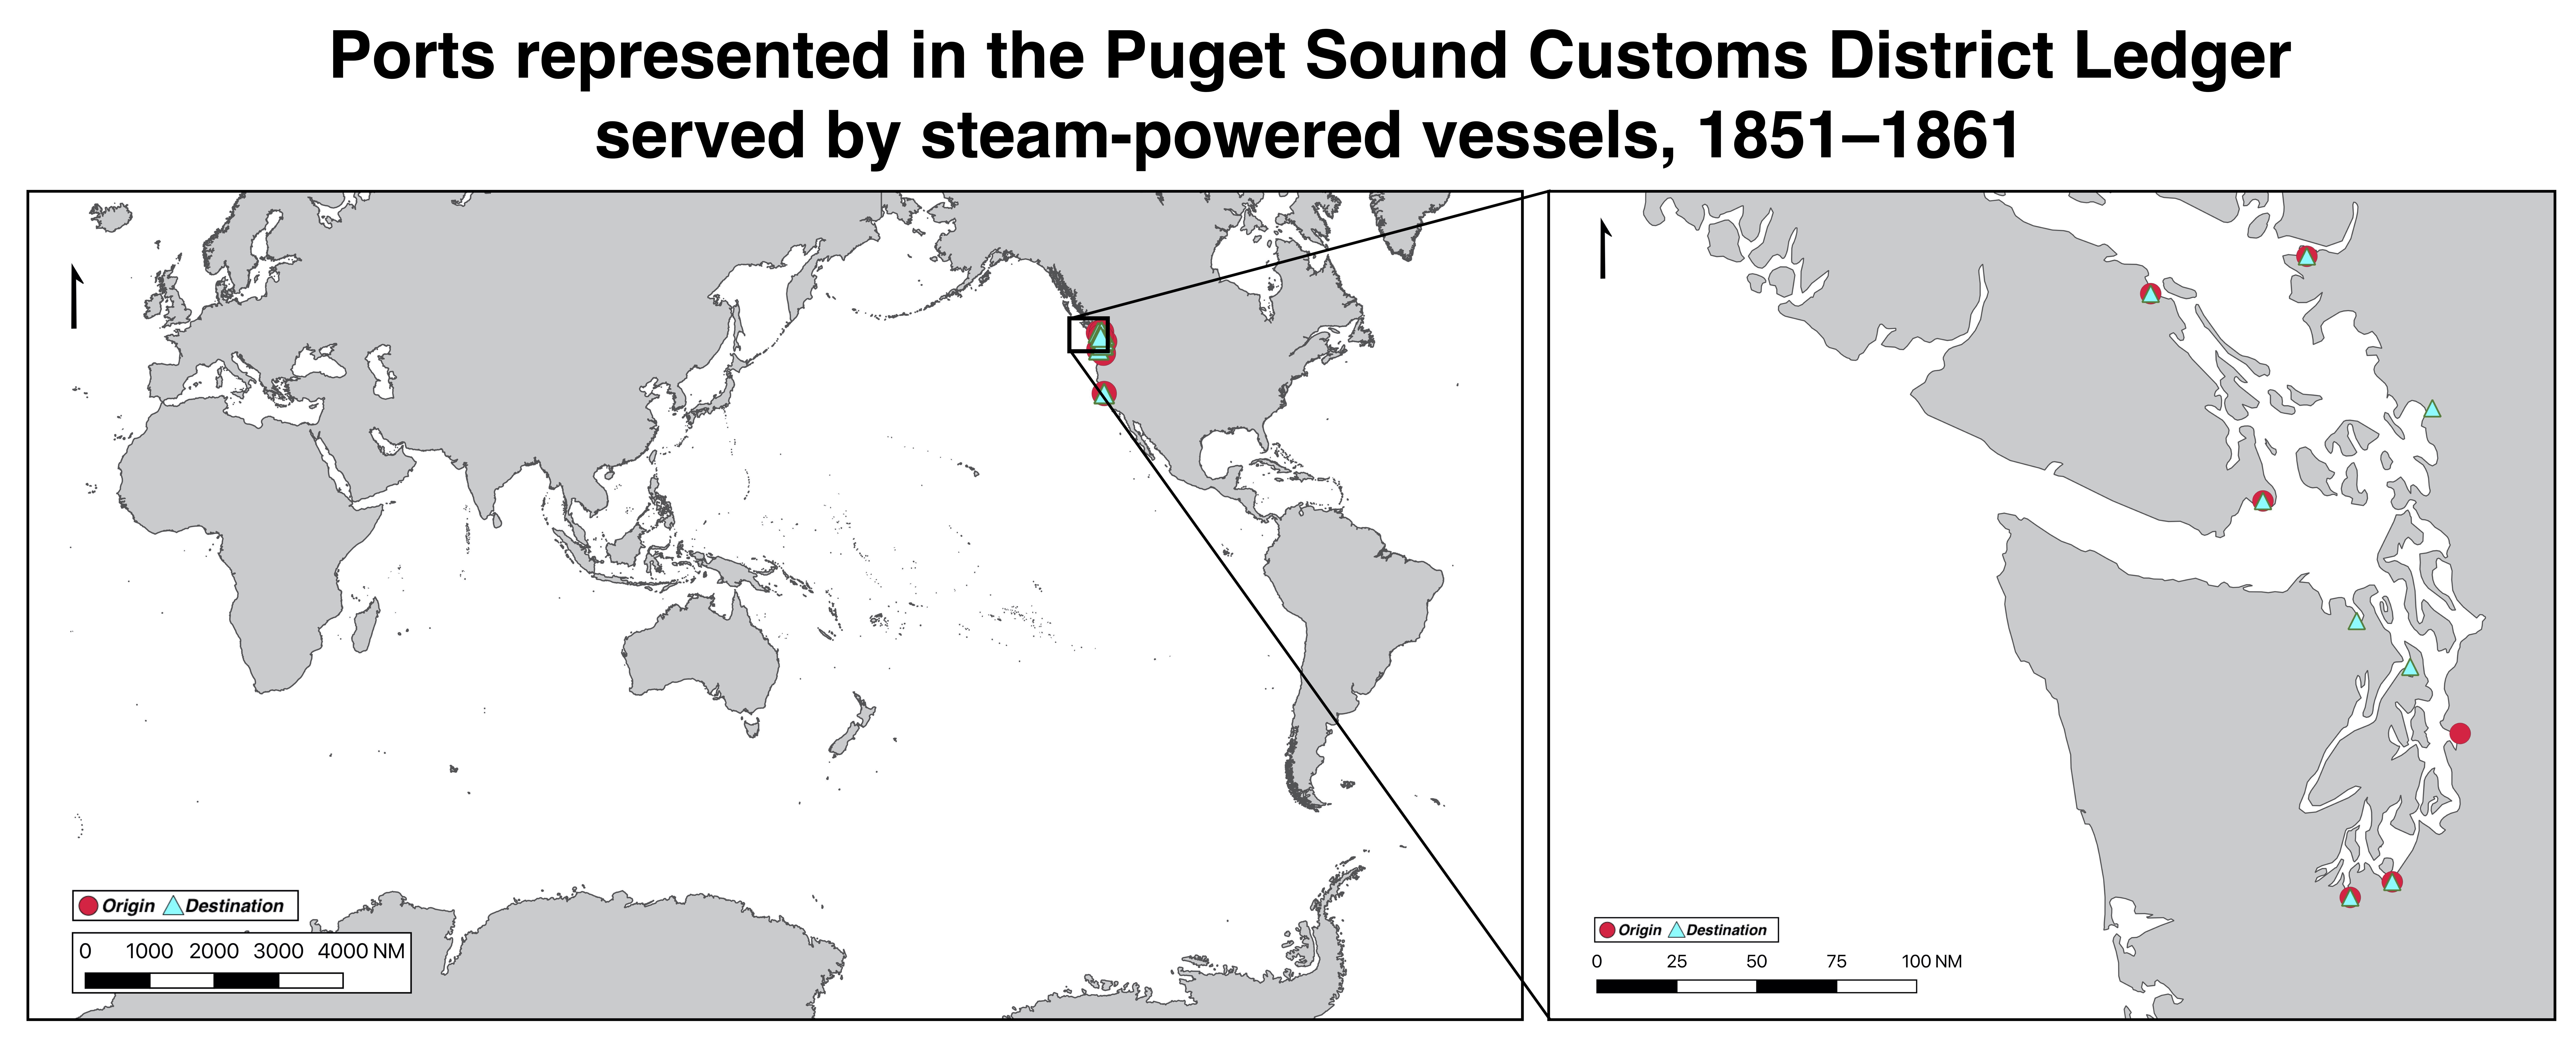 The left images shows a world map. The right images shows a close up of Puget Sound. Red circles indicate points of origin. Blue triangles indicate destinations.